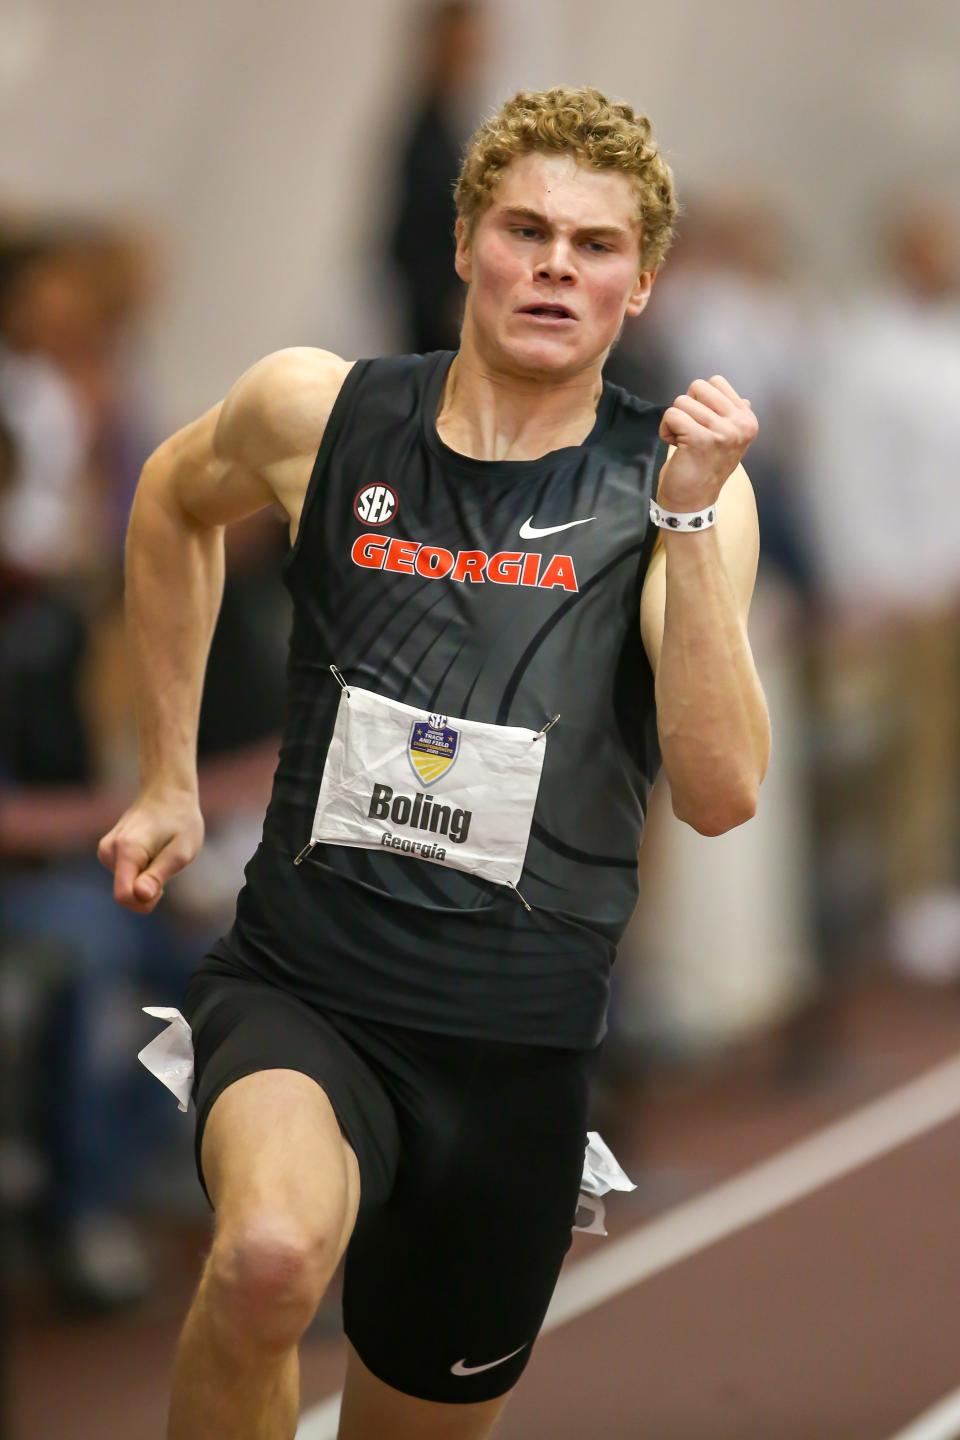 Matthew Boling, a former Texas schoolboy star at Houston Strake Jesuit, has been a 10-time first-team all-American for Georgia. The Bulldogs are entered in the Texas Tech Open and Multis meet from Thursday through Saturday at the Sports Performance Center.